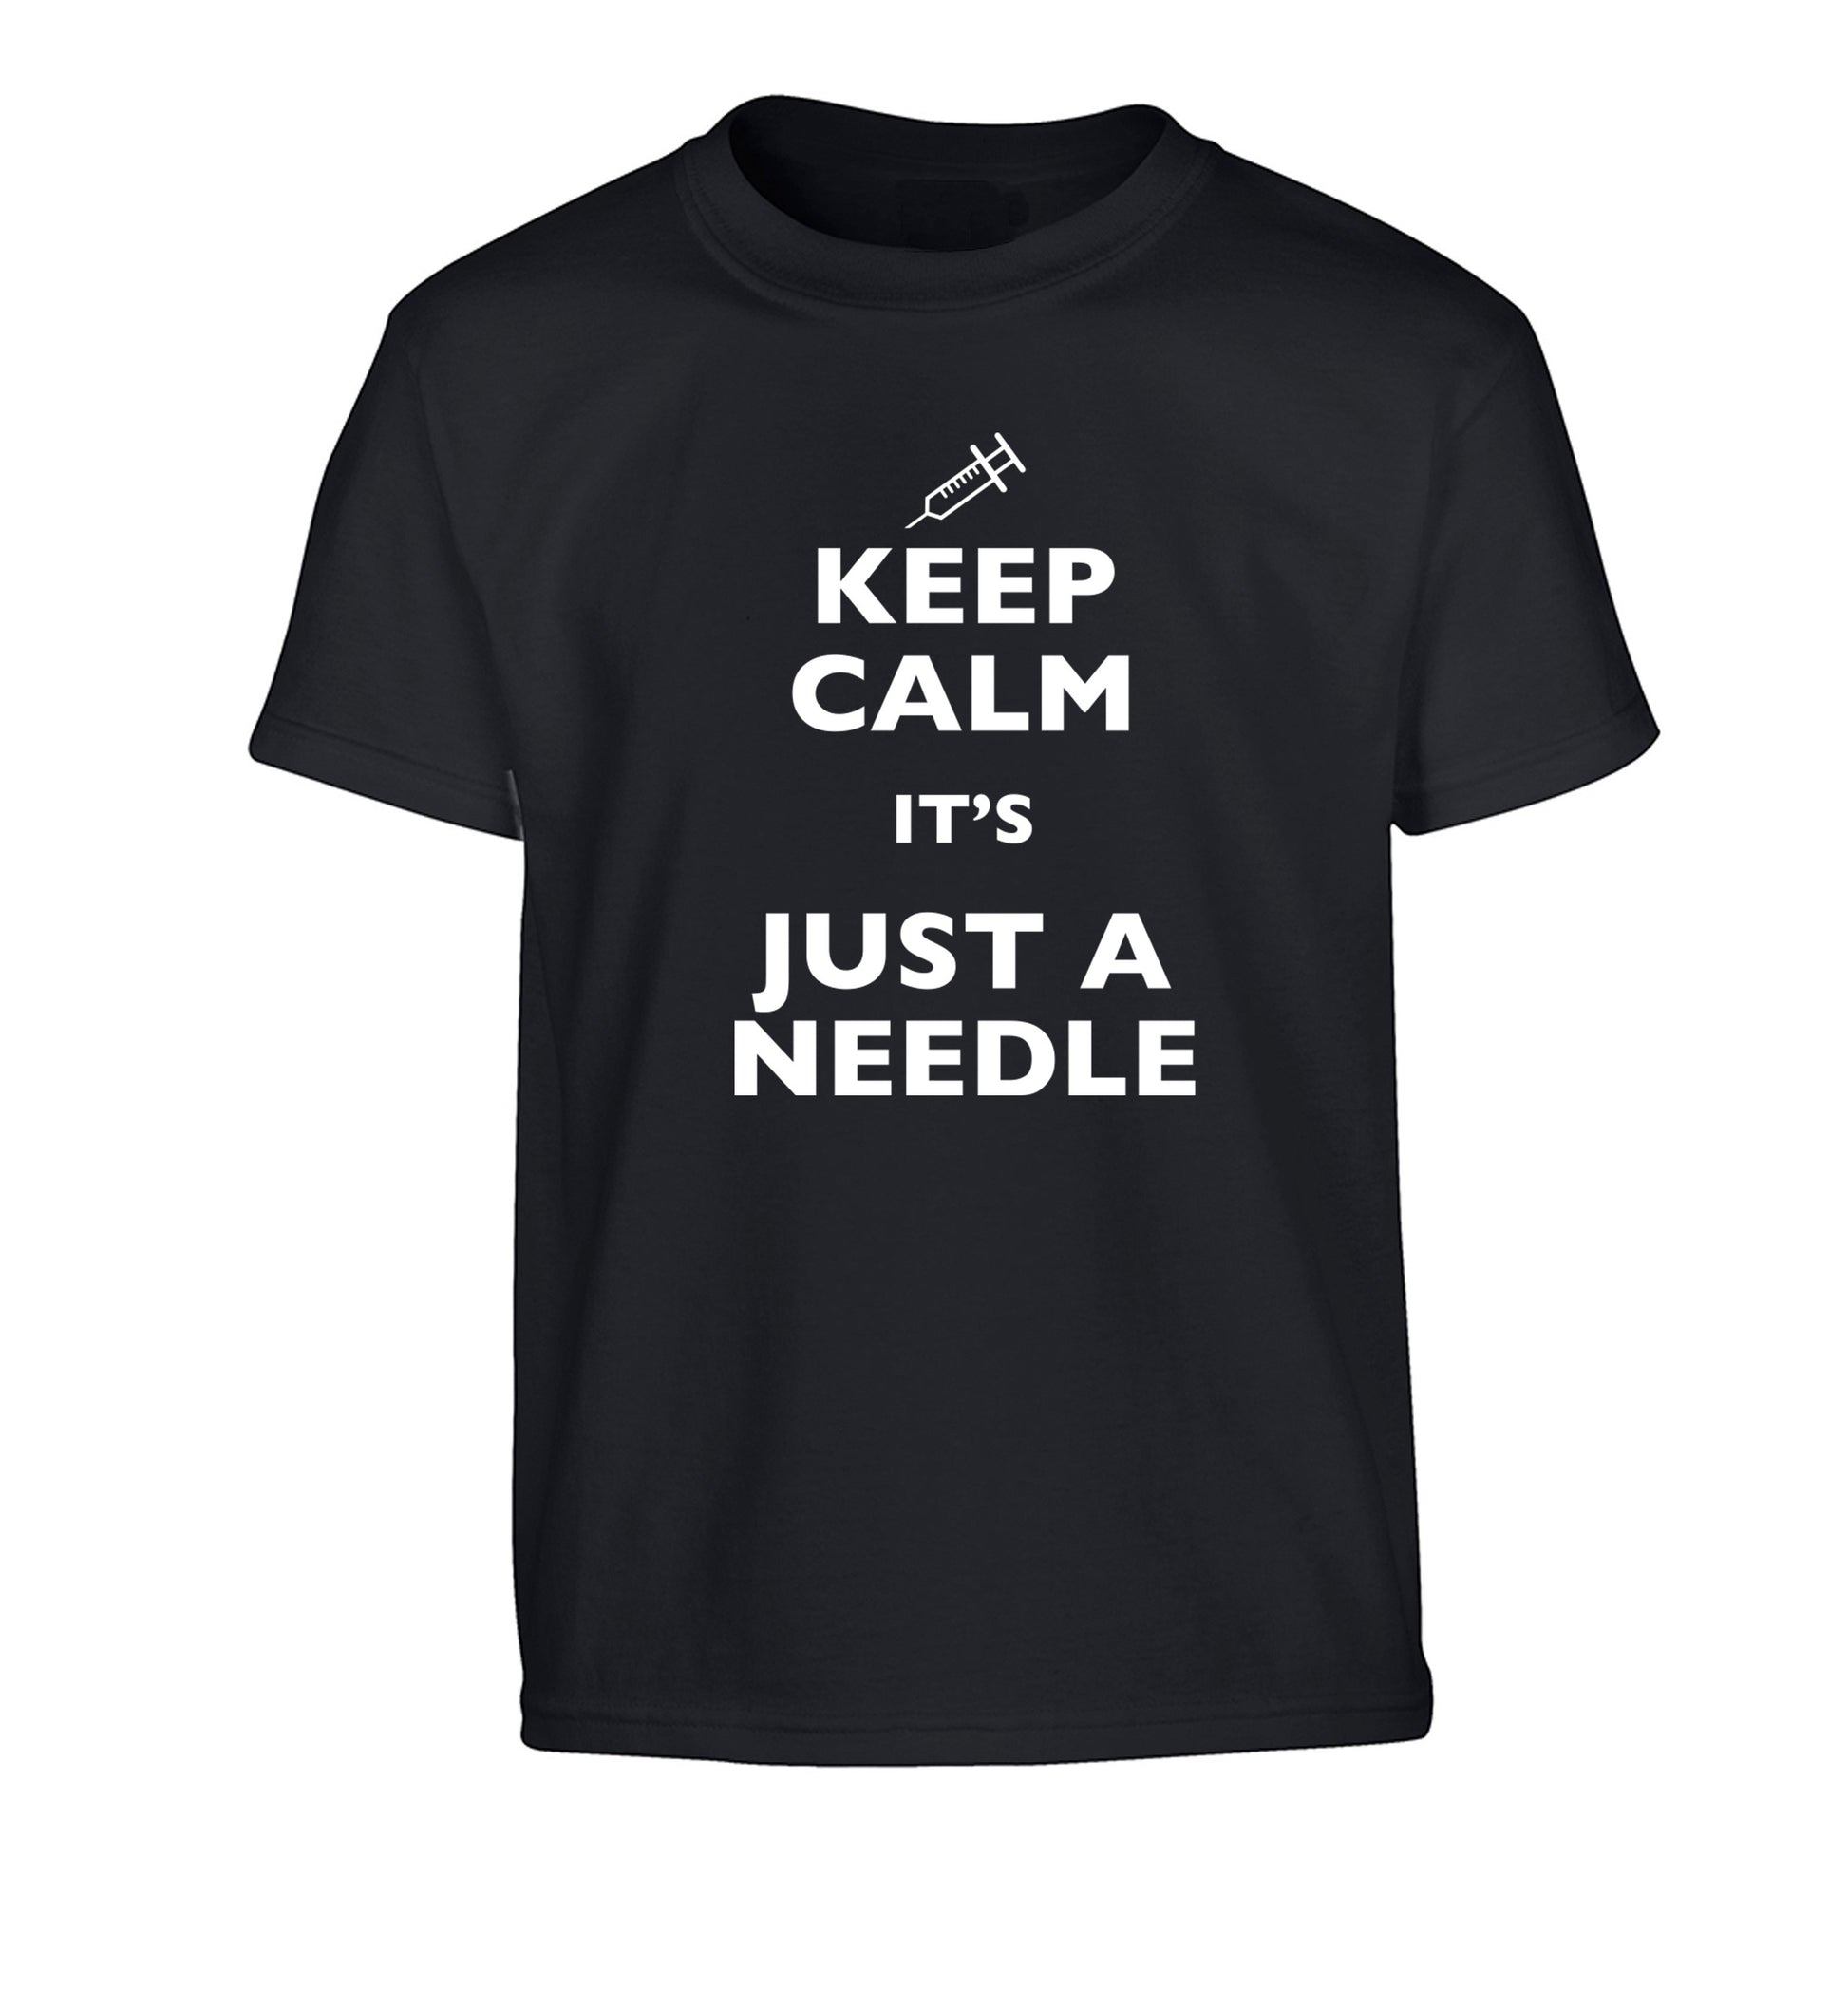 Keep calm it's only a needle Children's black Tshirt 12-14 Years